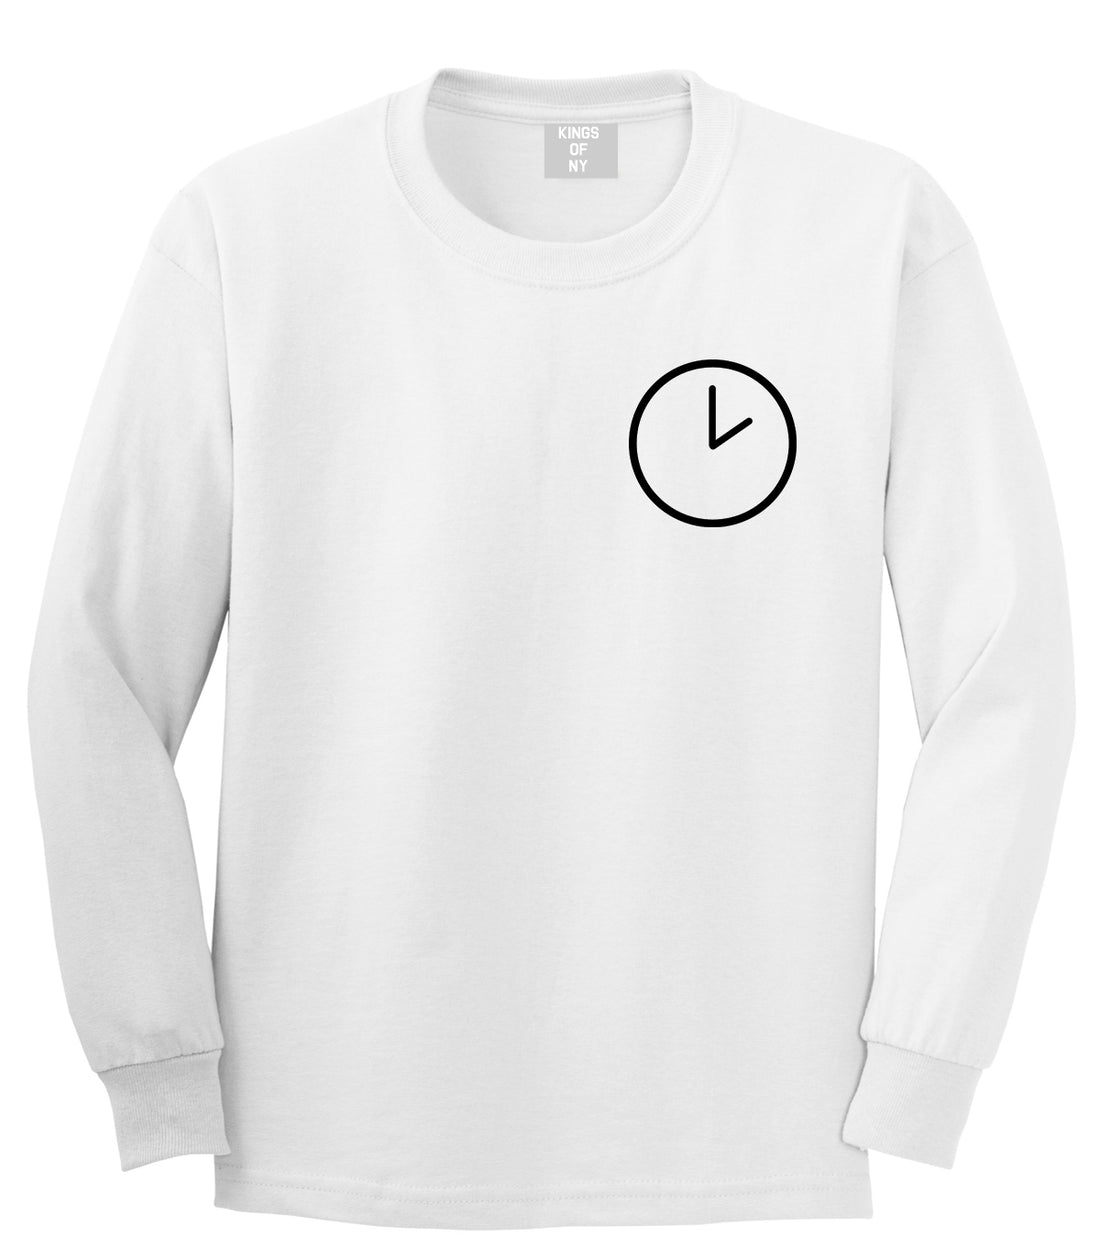 Clock Chest White Long Sleeve T-Shirt by Kings Of NY